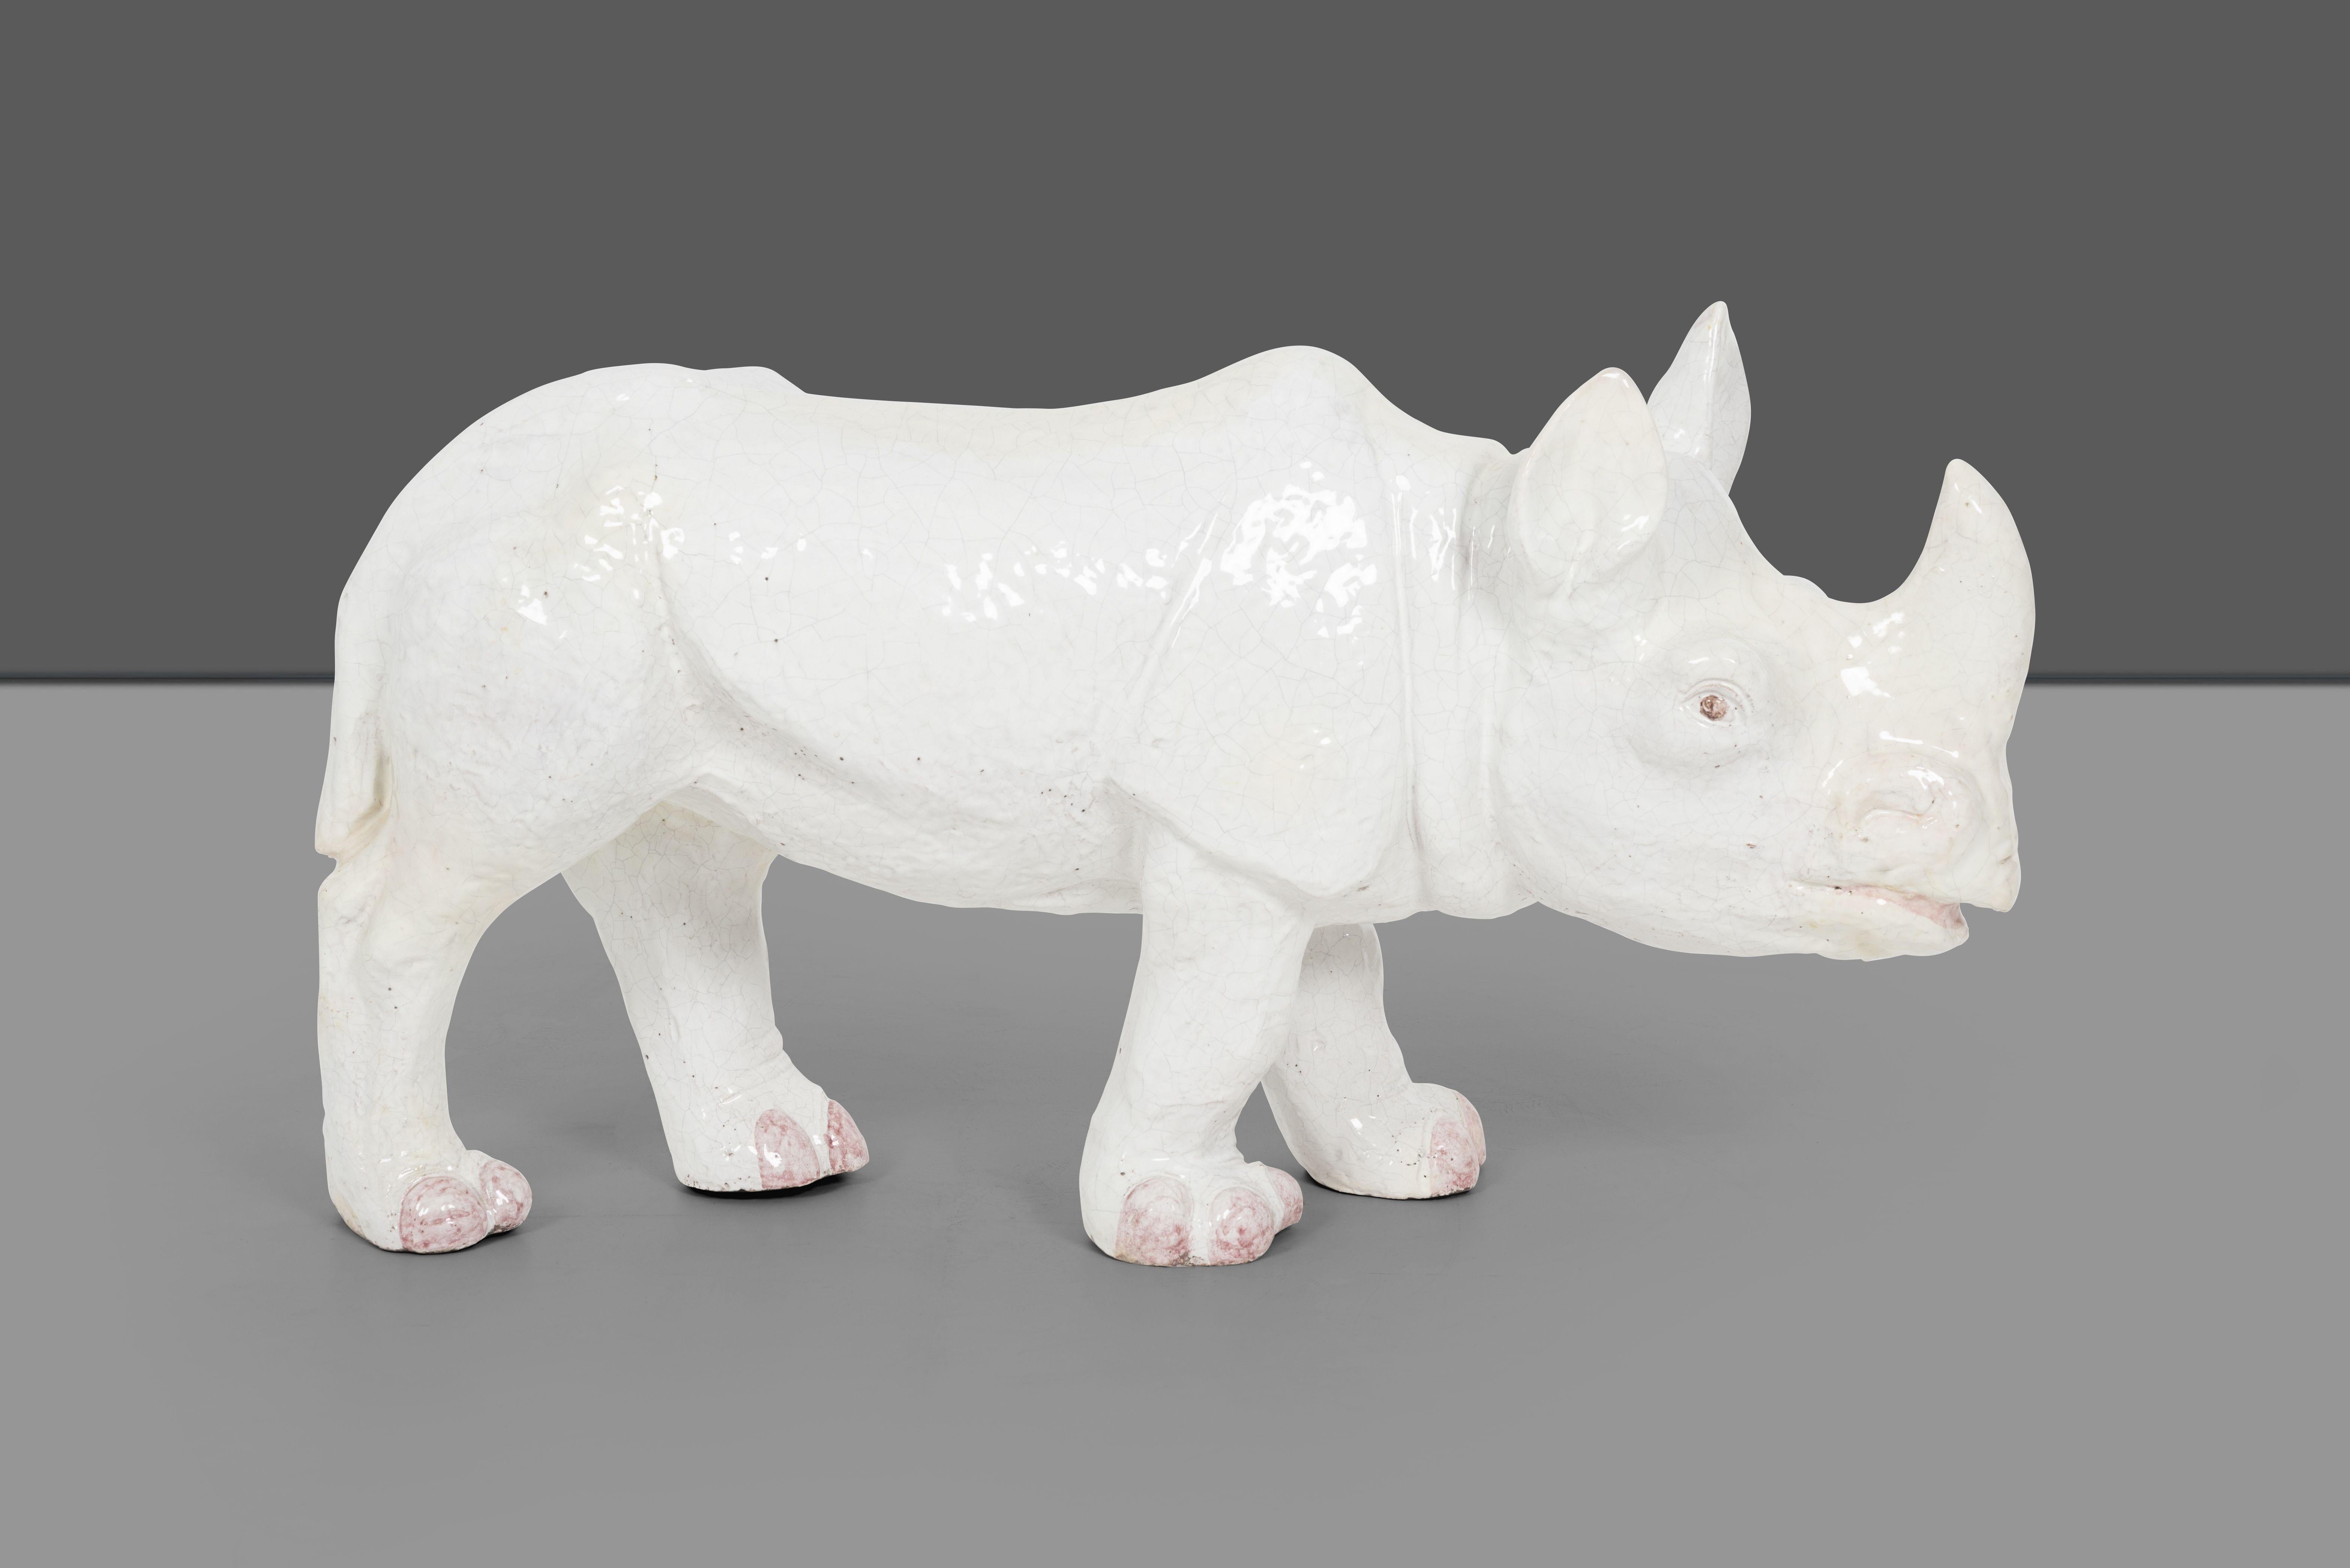 Ceramic Rhino by Trouvailles, France, showing natural crazing, painted toes, eyes and mouth.